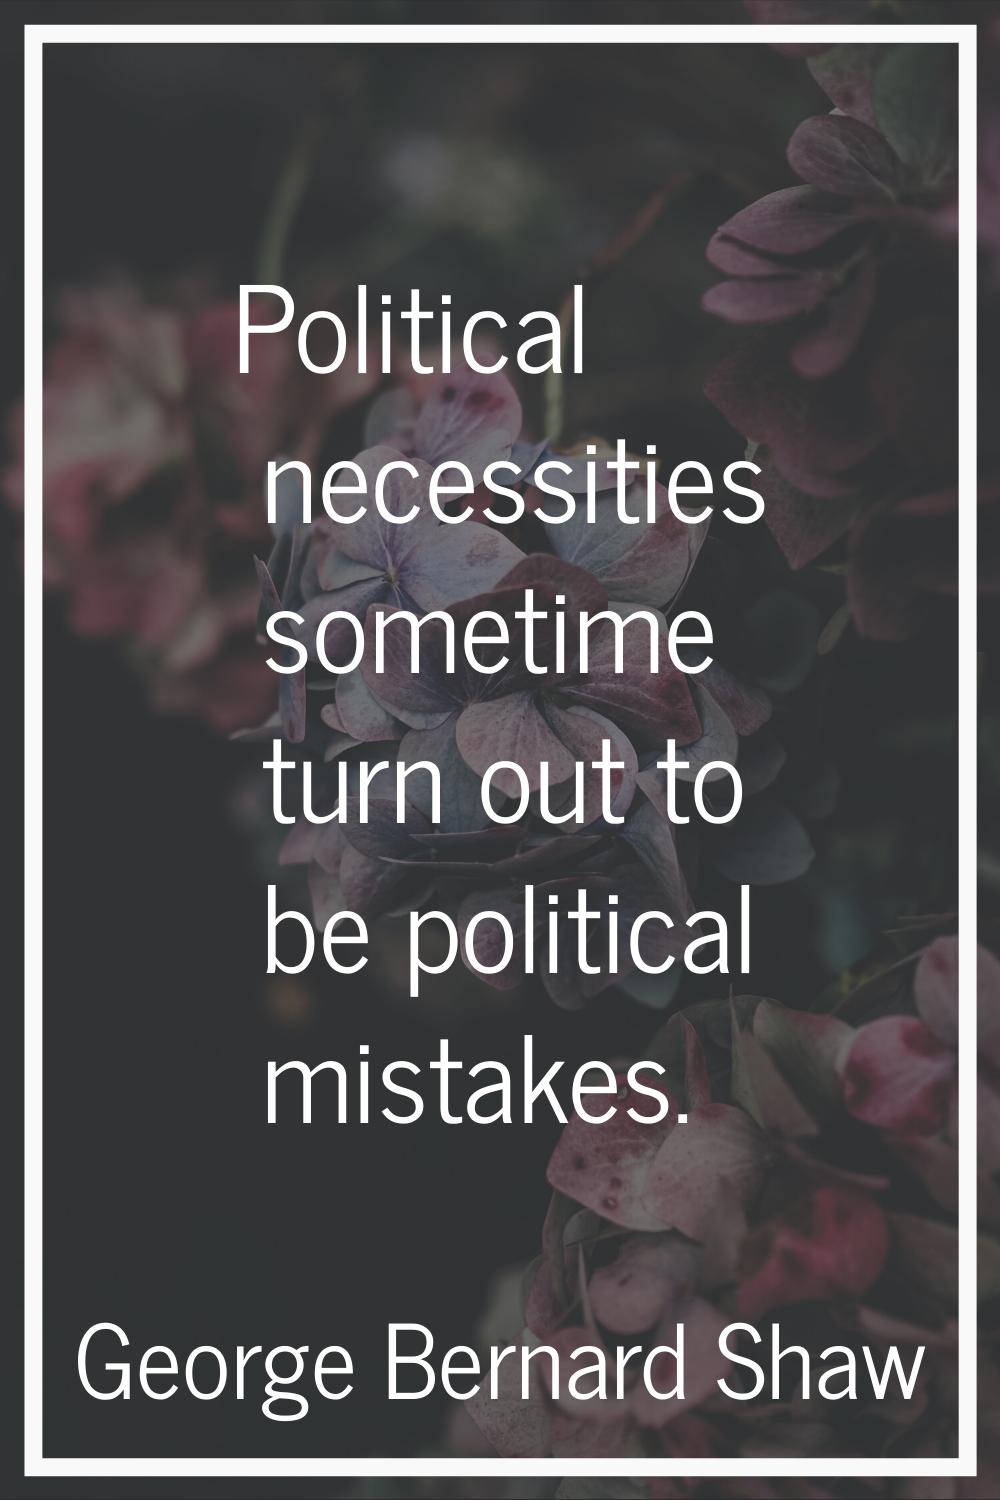 Political necessities sometime turn out to be political mistakes.